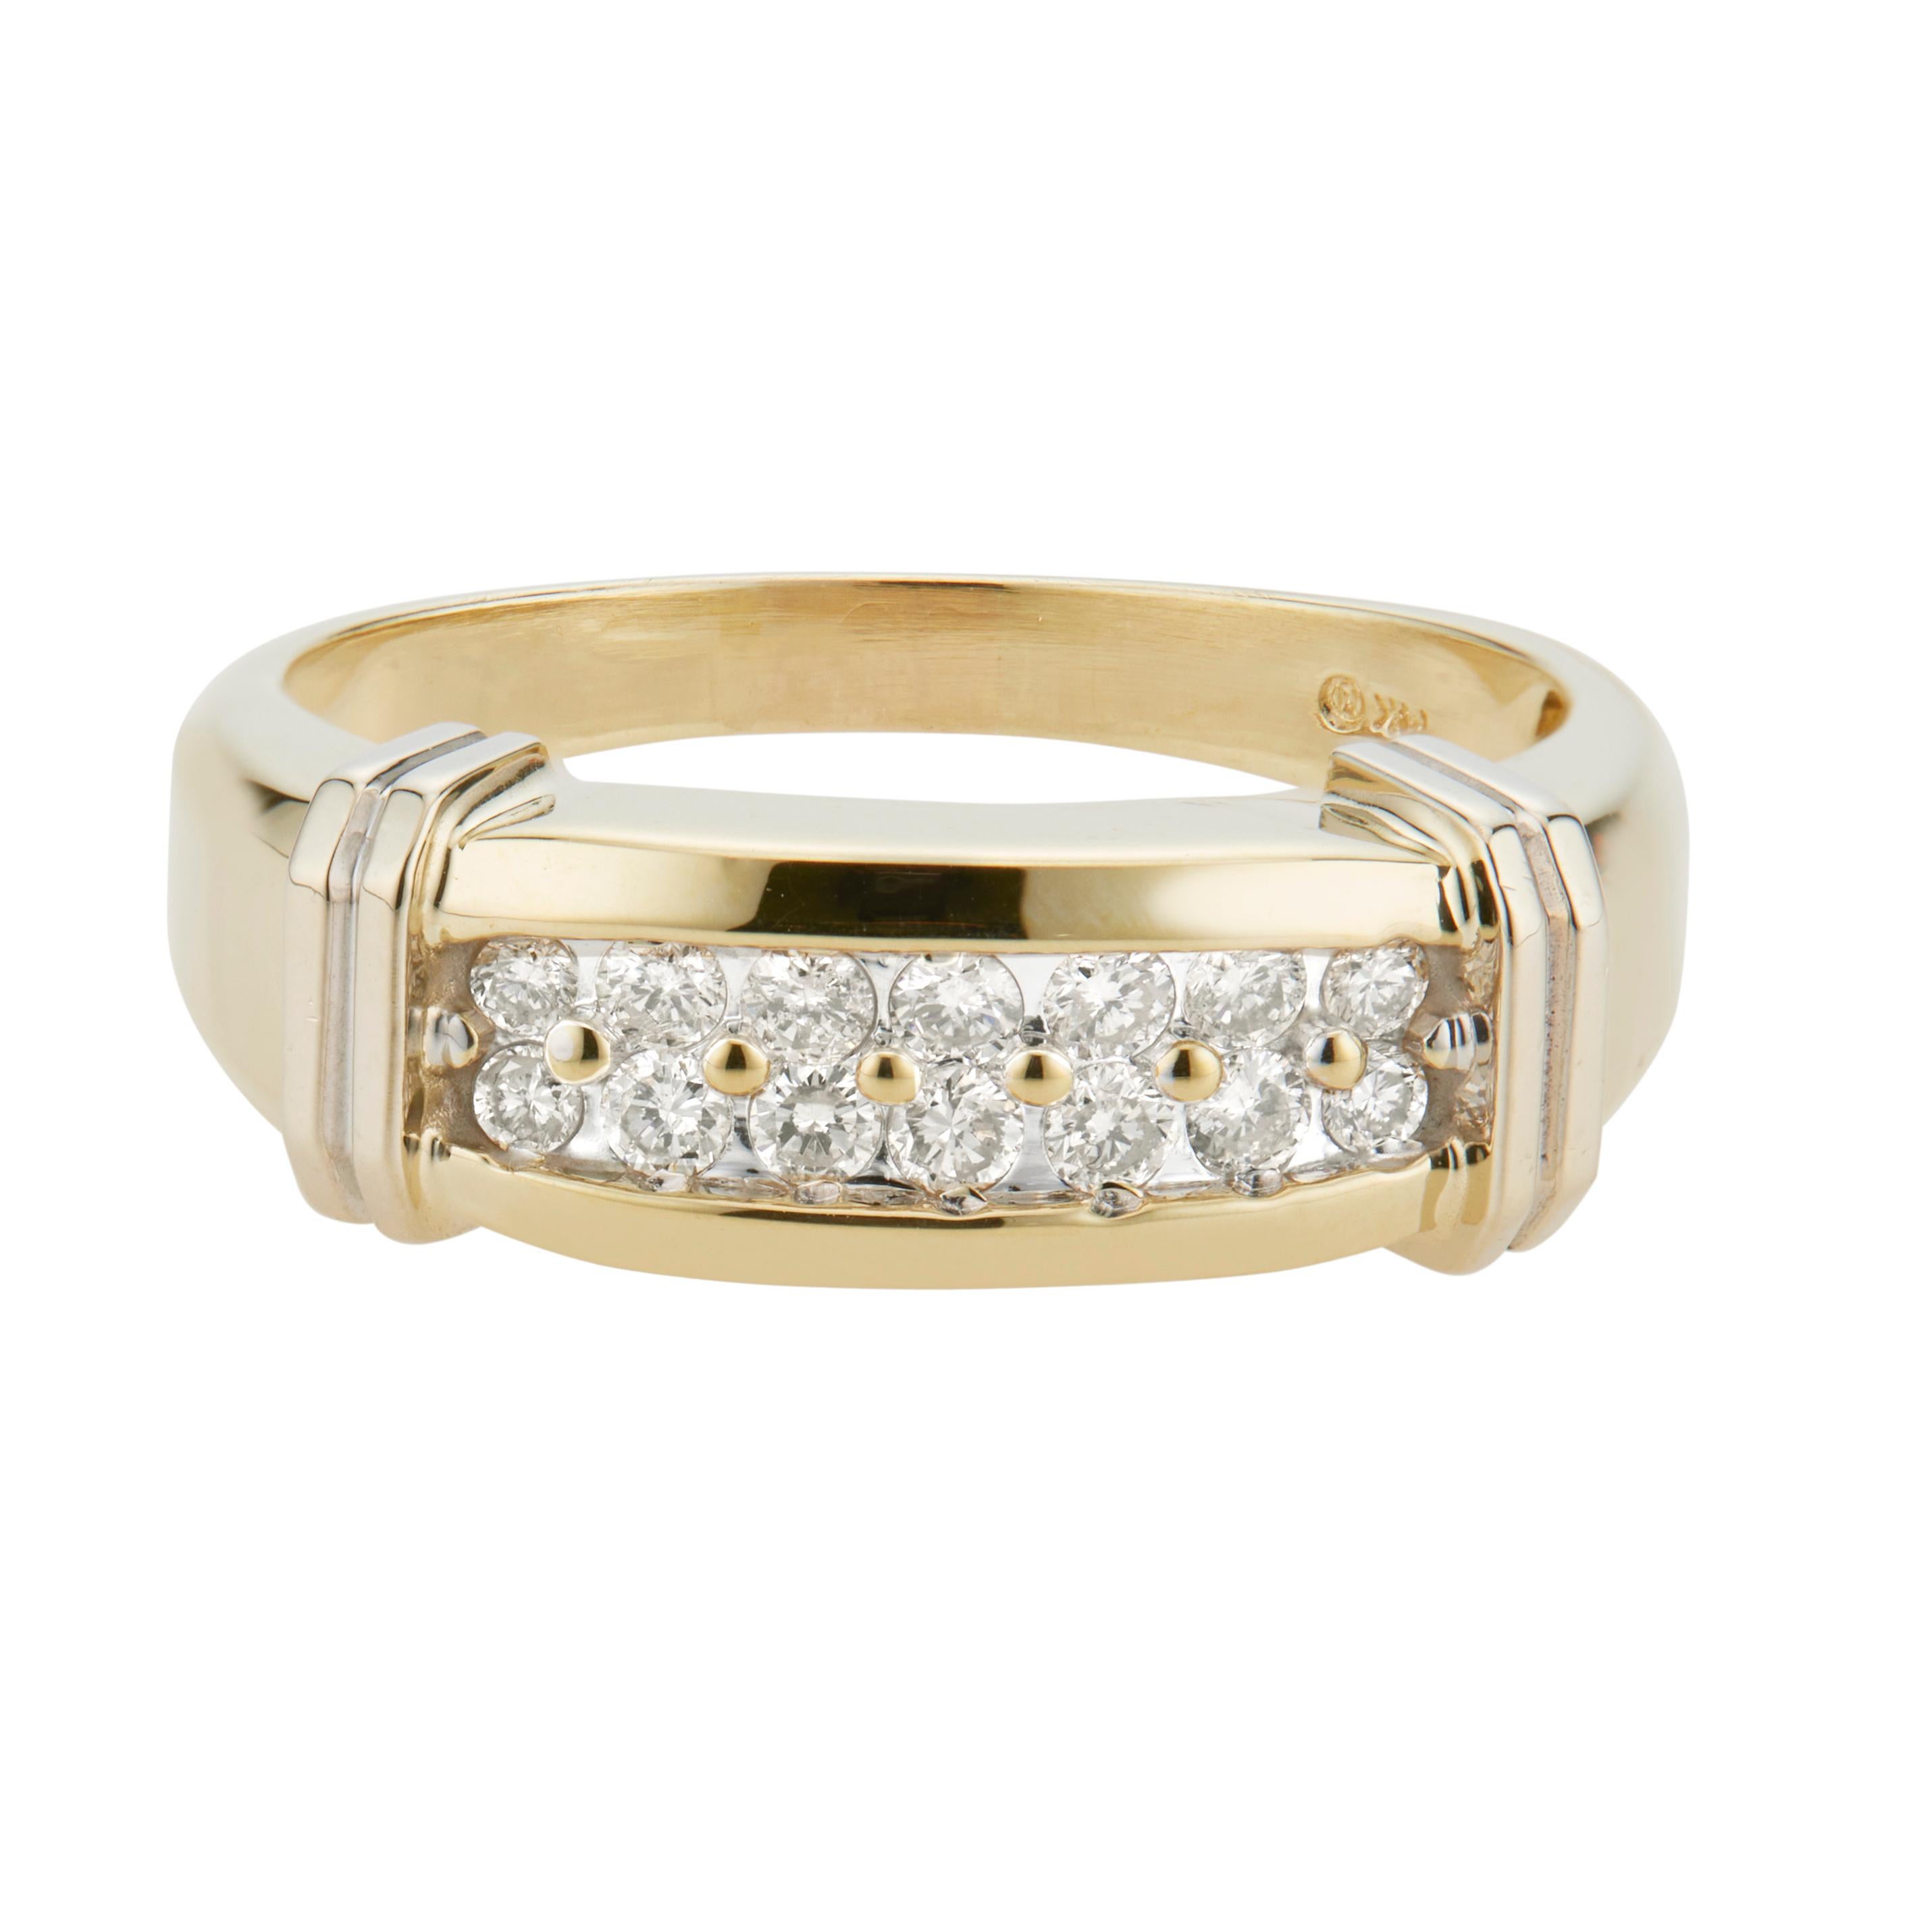 Men's two row diamond band ring. 14 round diamonds set in a 14k yellow and white gold setting. Circa 1980

14 round brilliant cut diamonds, I-J VS2 approx. .42cts
Size 12.5 and sizable 
14k yellow gold 
14k white gold
Stamped: 14k
6.2 grams
Width at